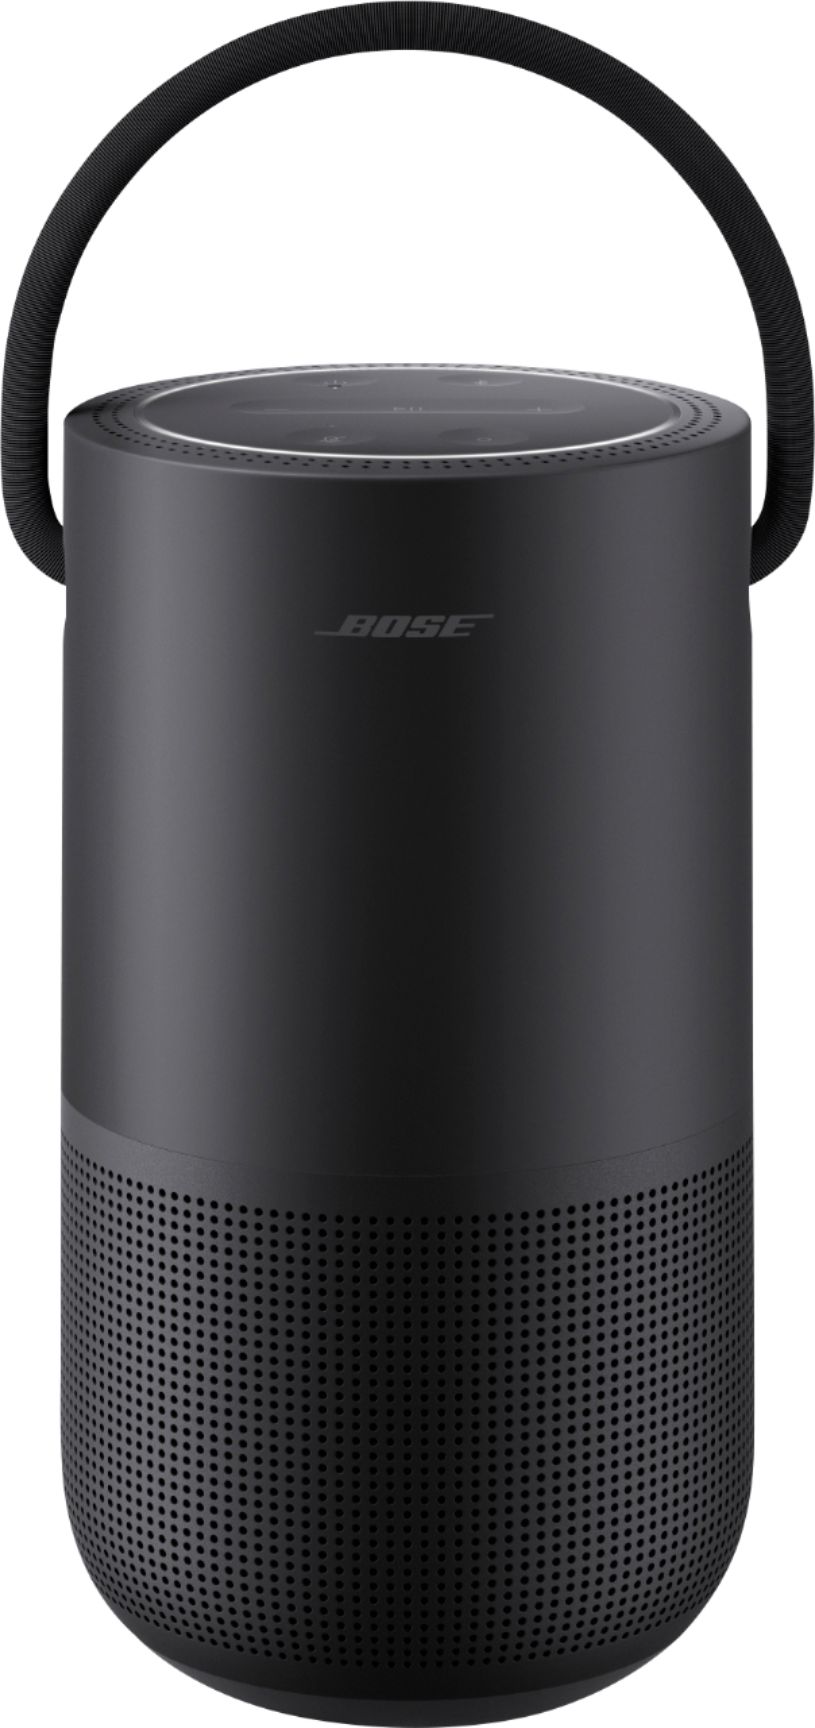 Bose Portable Smart Speaker with WiFi, Bluetooth, Google Assistant and Alexa Voice Control Black 829393-1100 - Best Buy